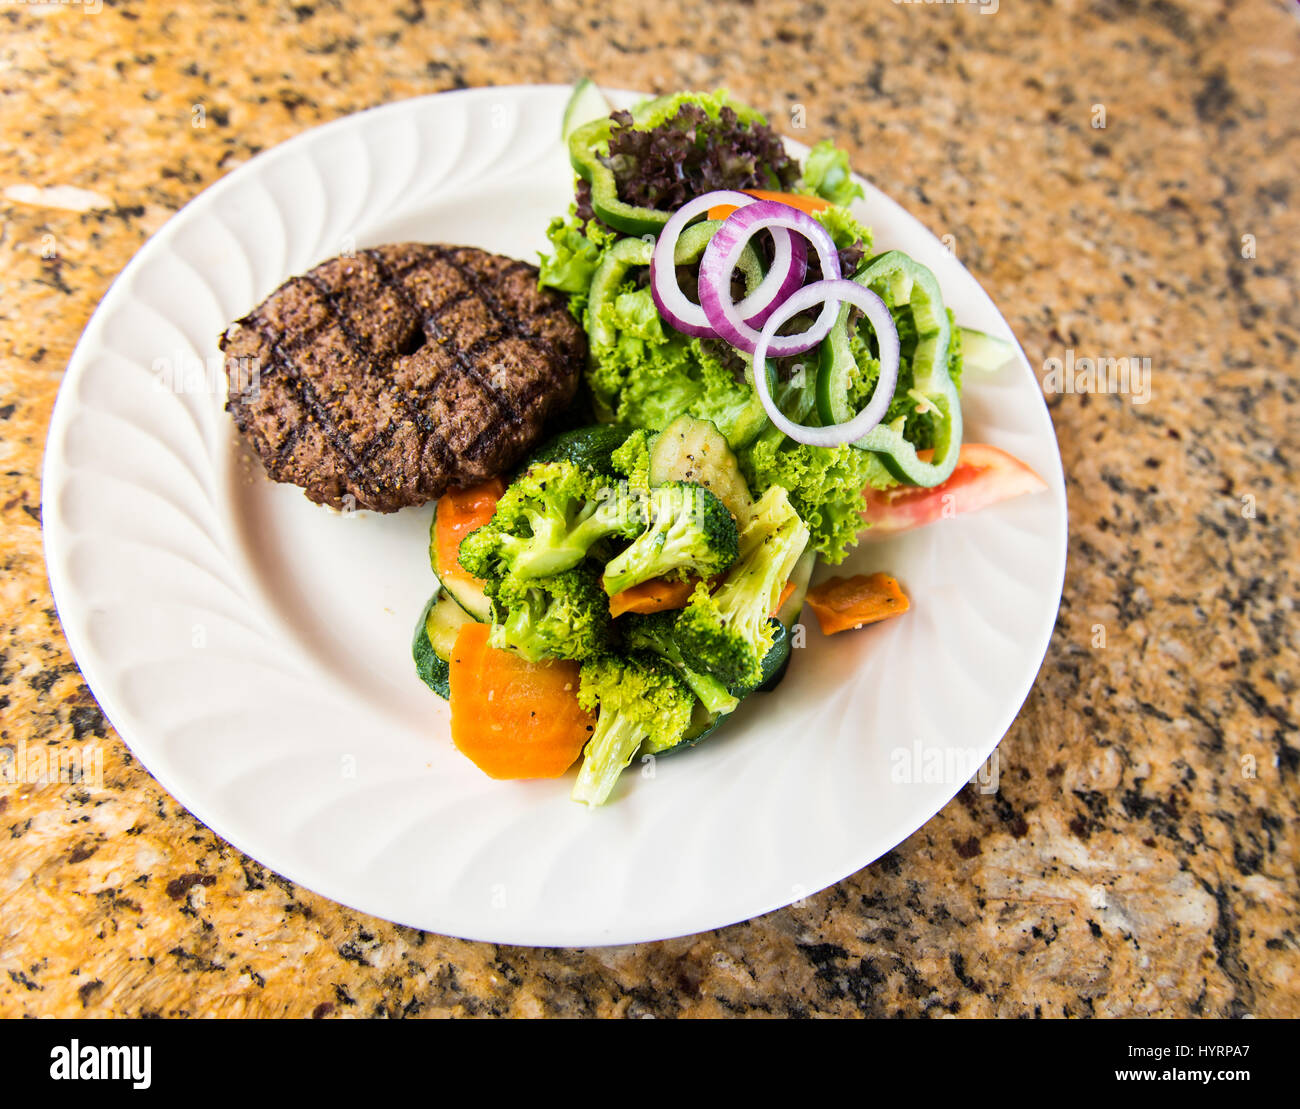 Meat Patty with salad and vegetables Stock Photo